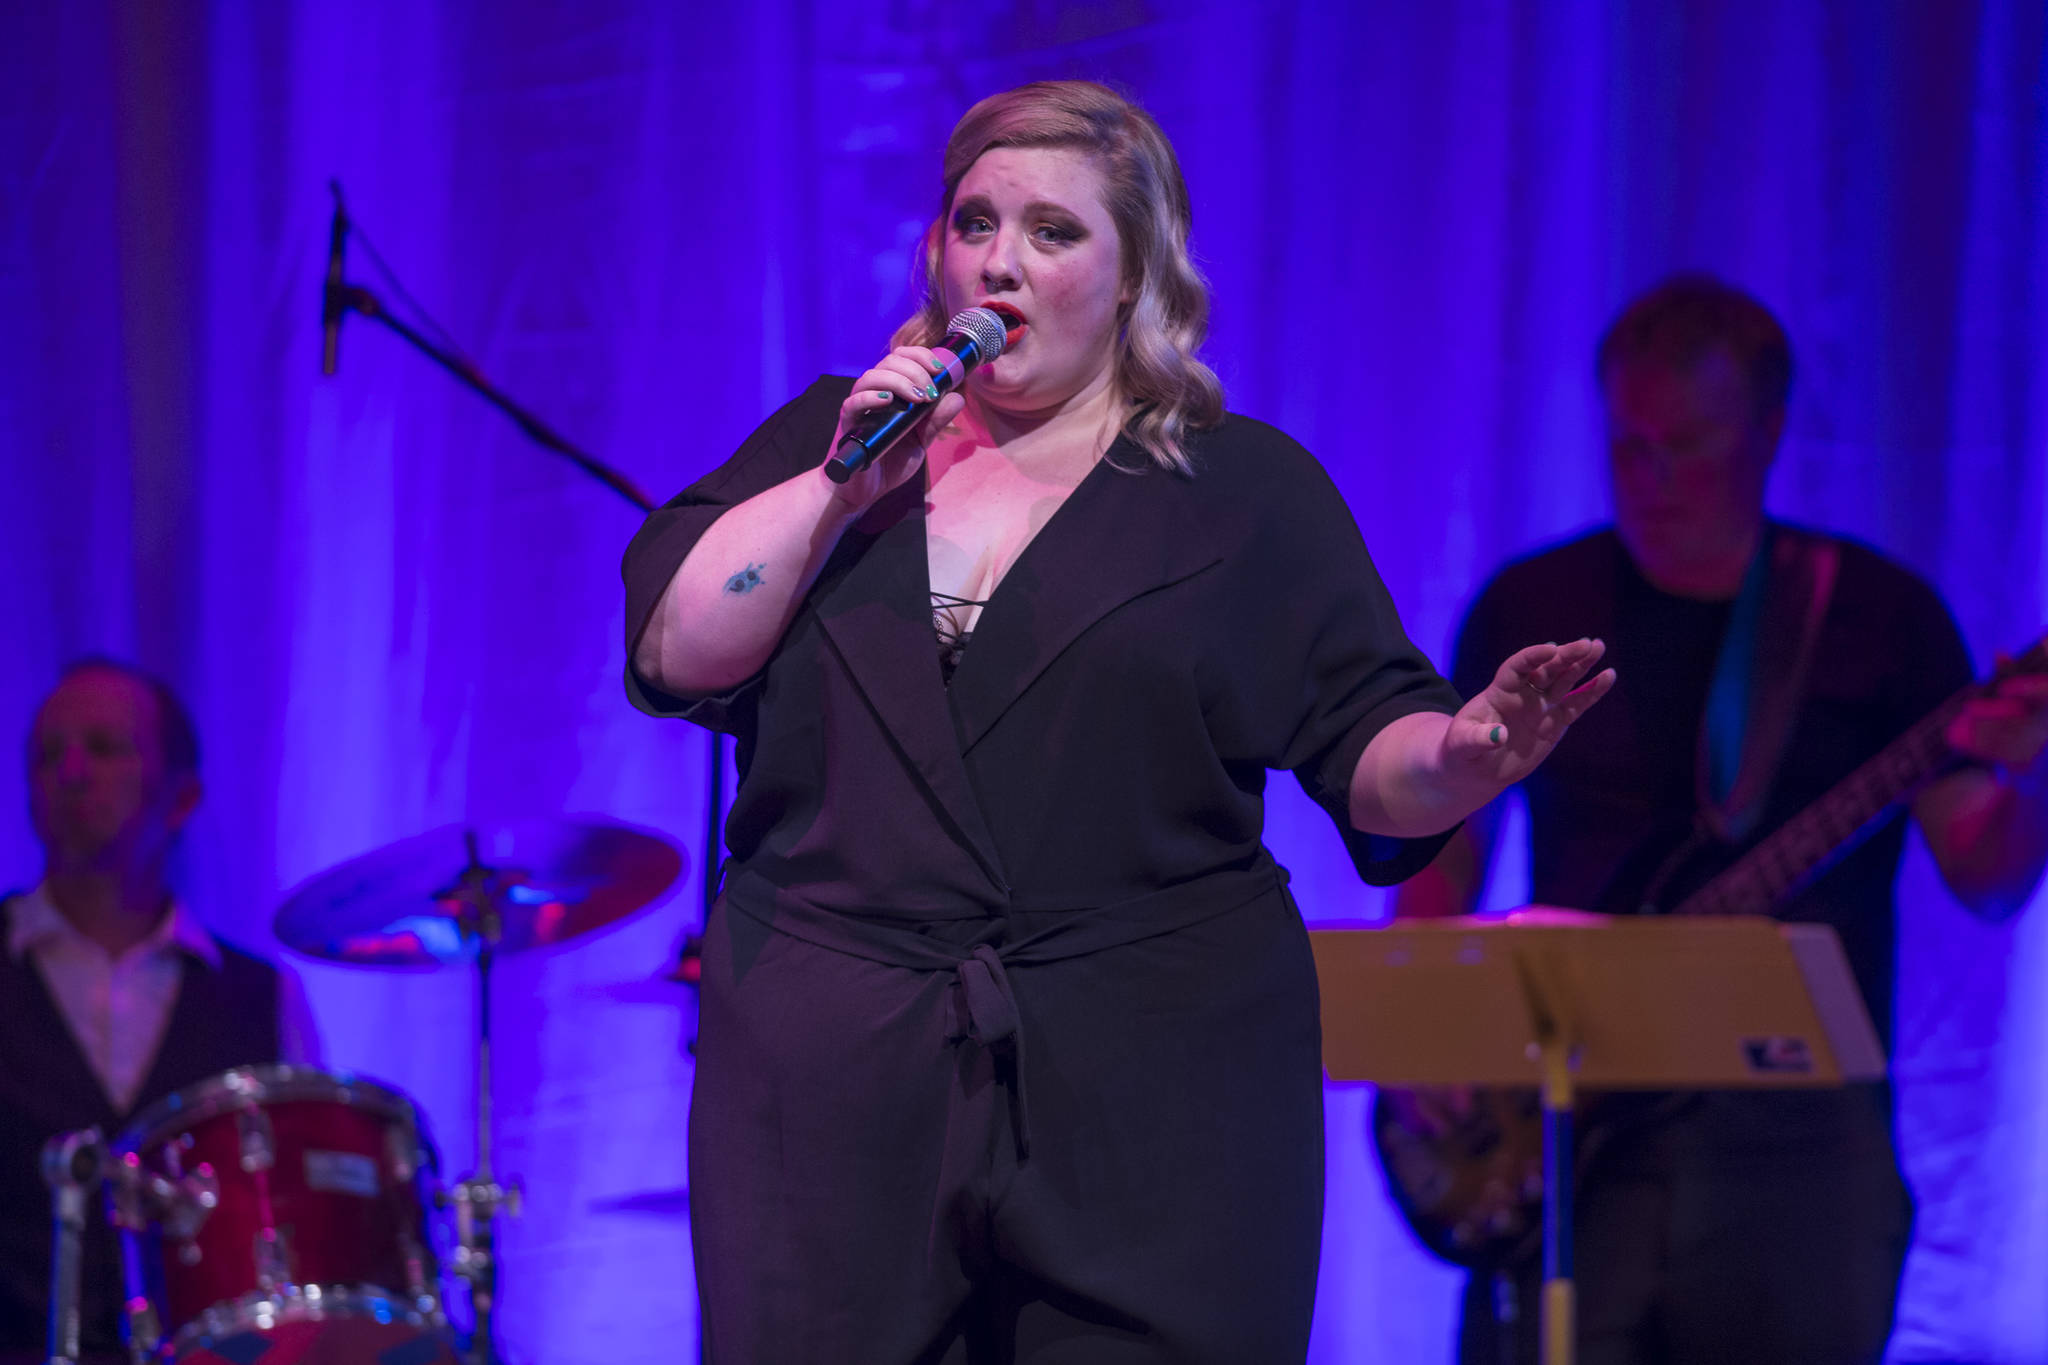 Andria Budbill performs at Juneau Lyric Opera’s production of “Who’s Your Diva?” at Centennial Hall on Saturday, Sept. 29, 2018. (Michael Penn | Juneau Empire)